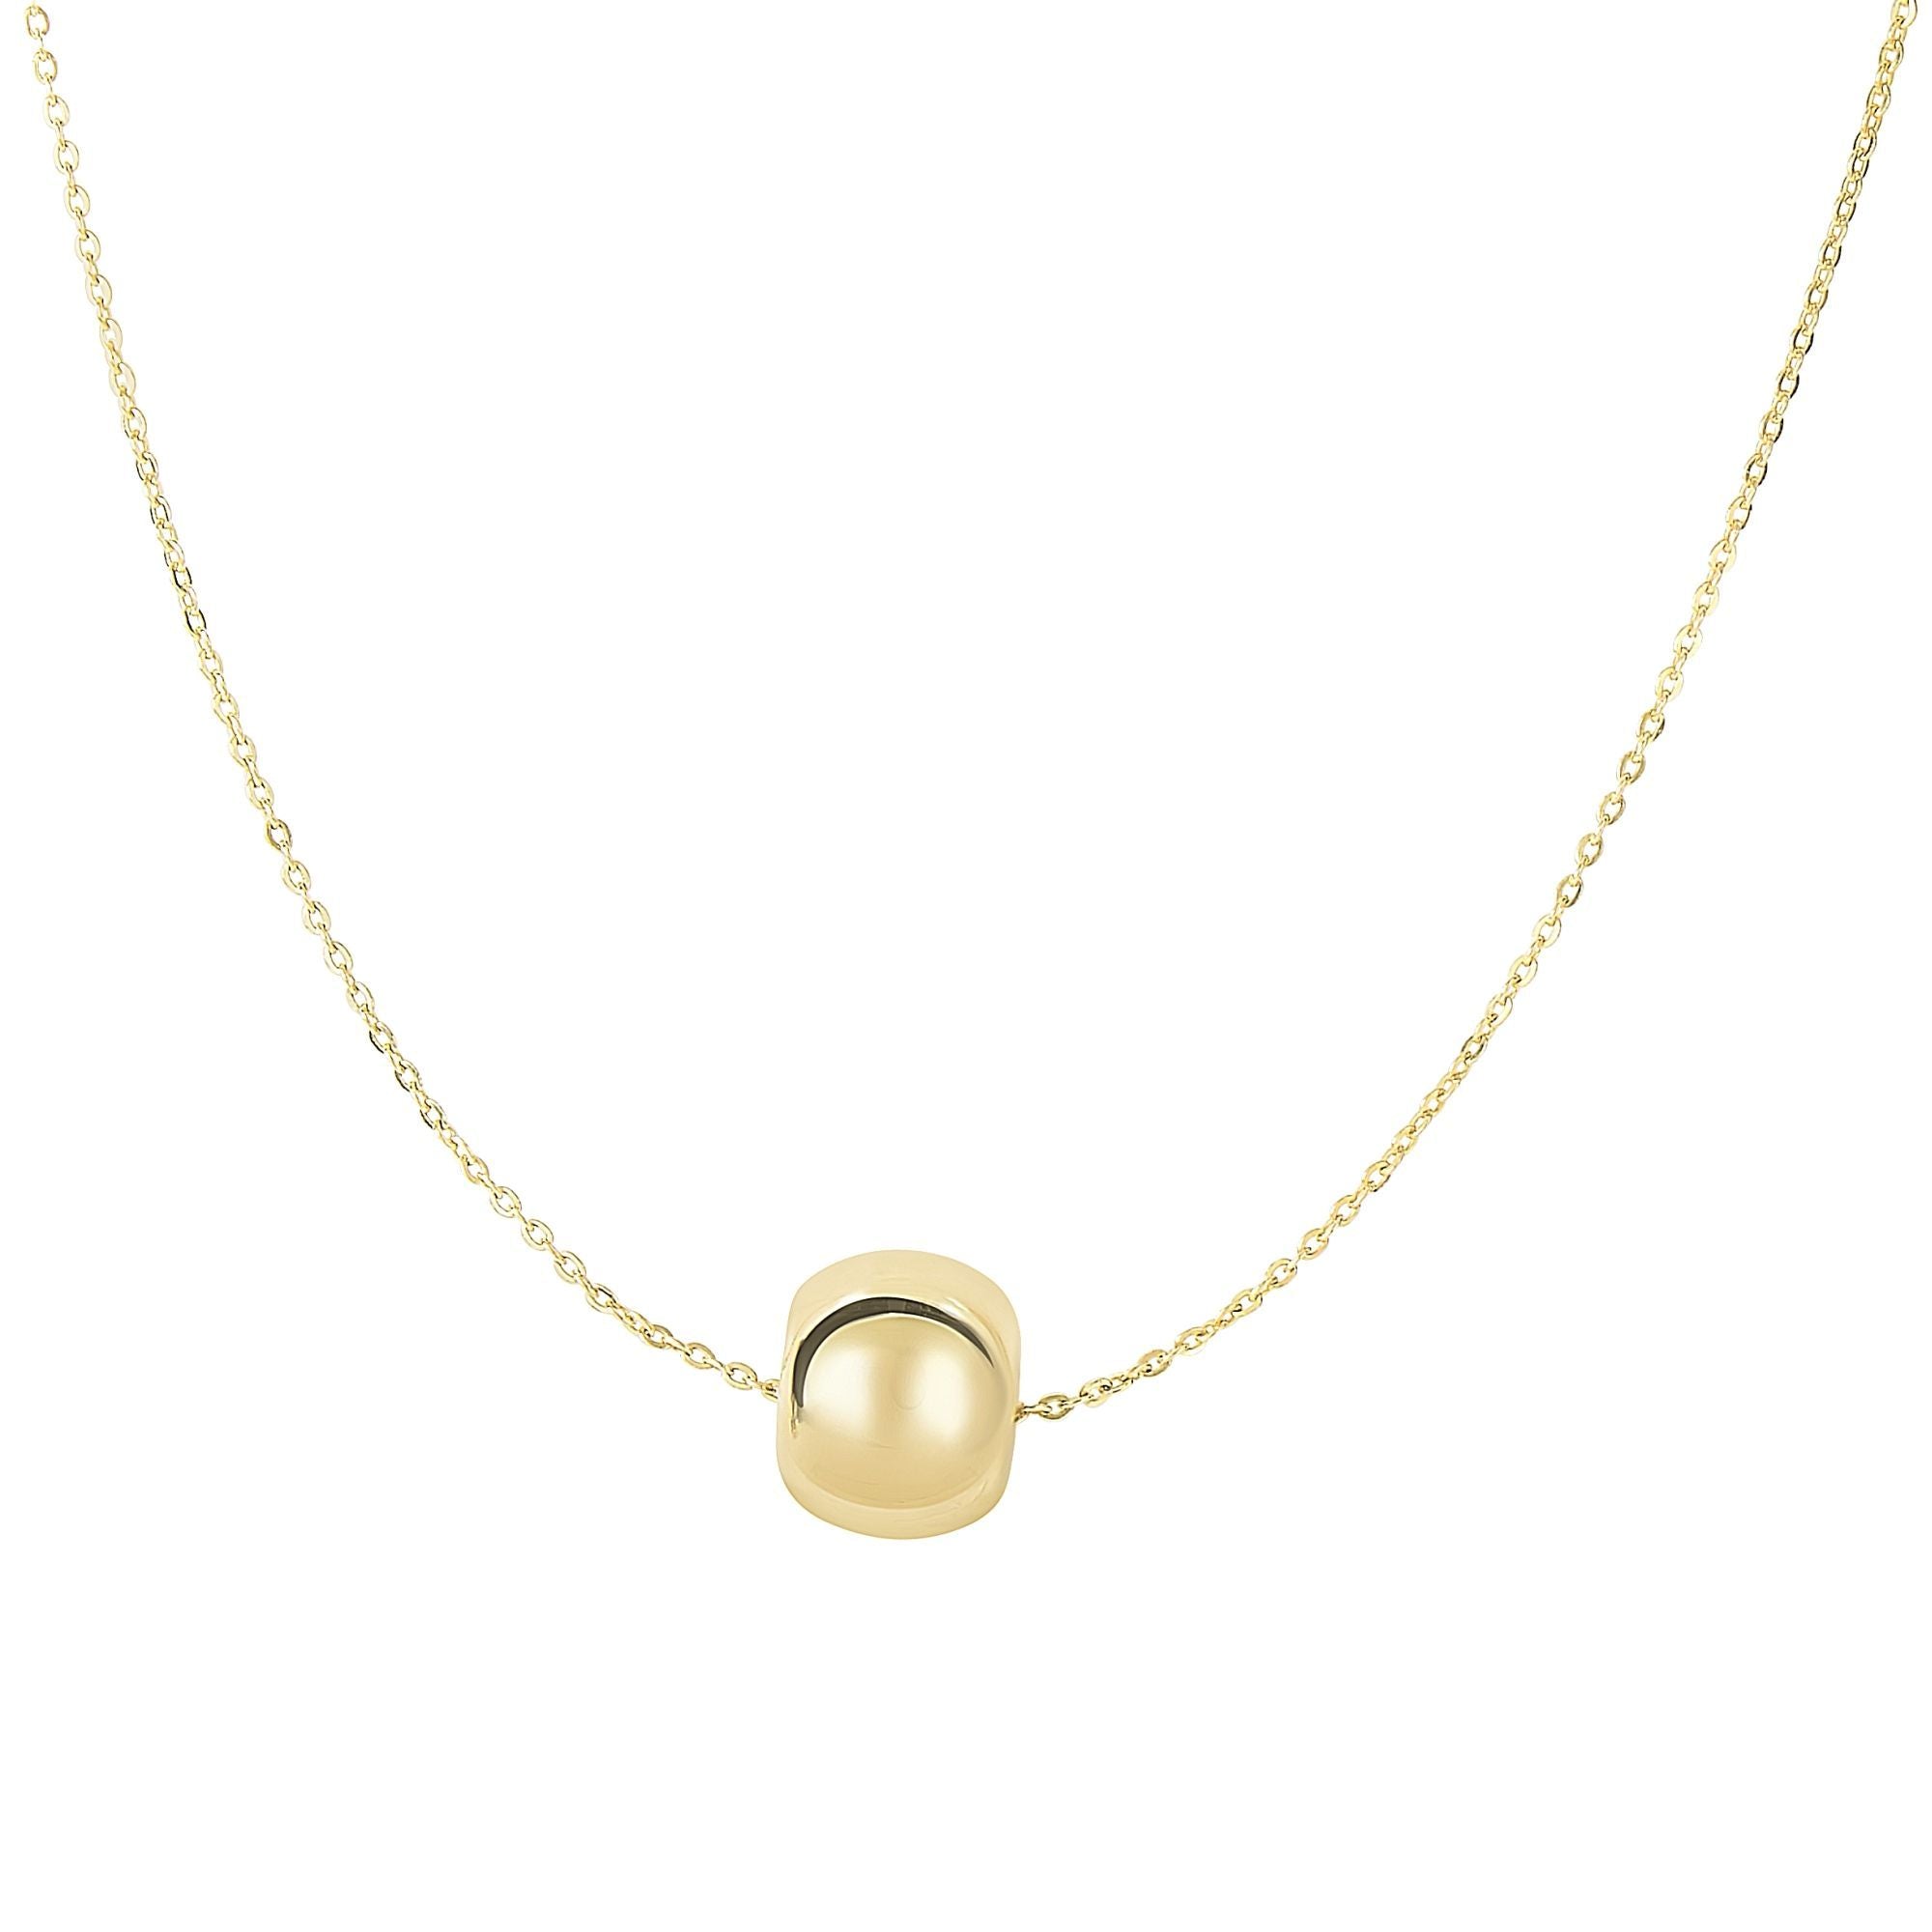 Minimalist Solid Gold Round Bead Adjustable Charm Necklace with Lobster Clasp - wingroupjewelry